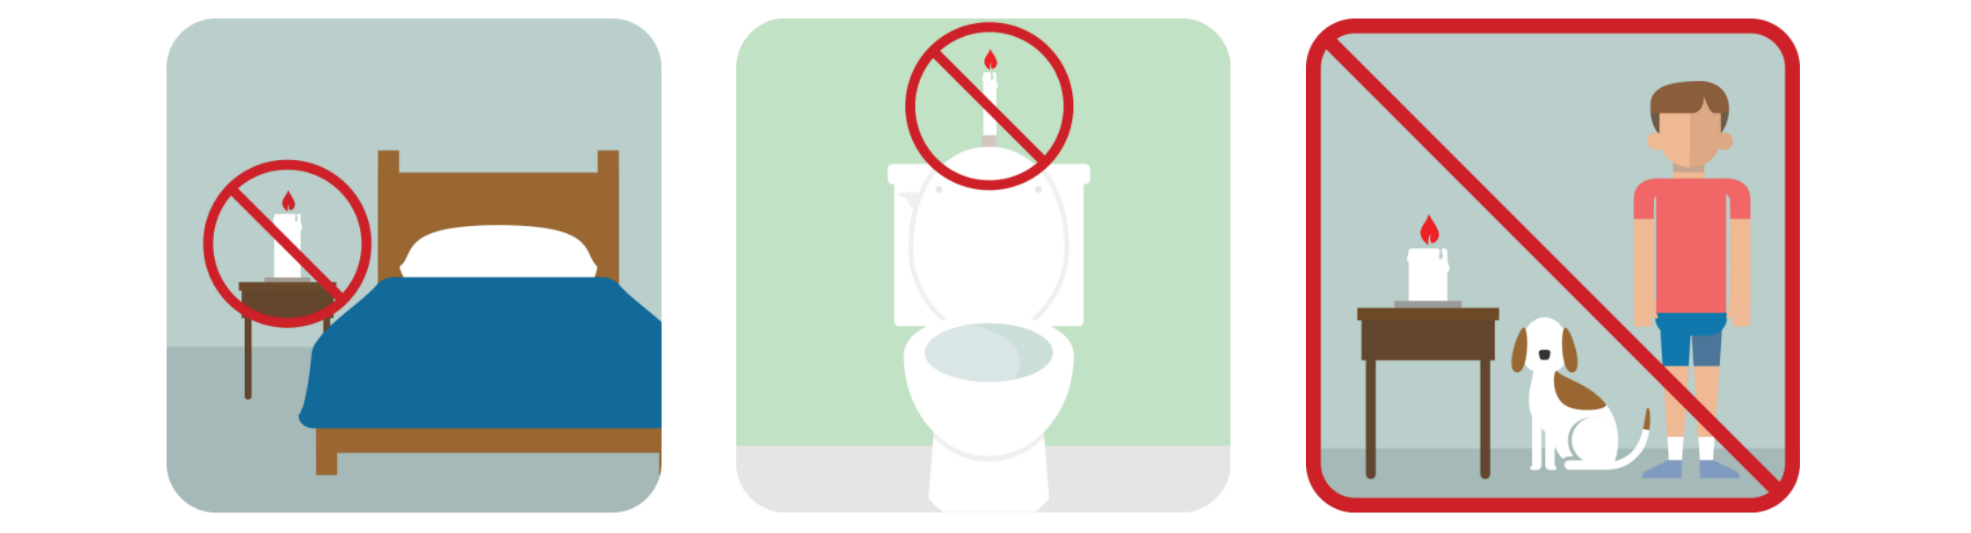 A cancel sign over a lit candle placed on top of an open toilet lid.